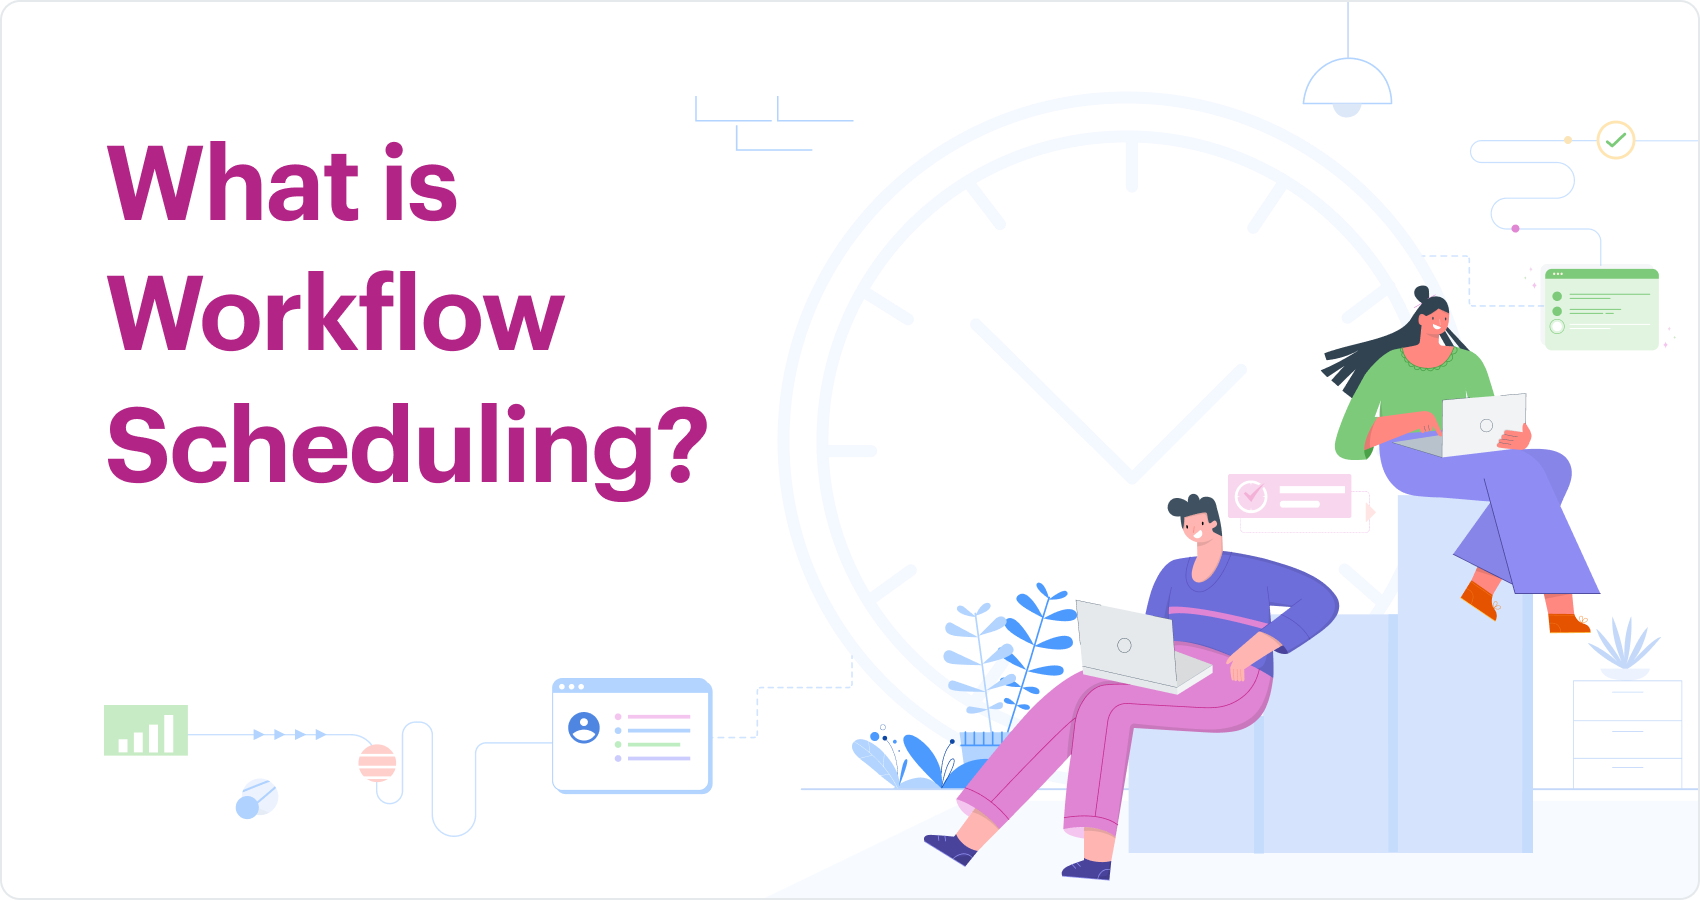 What is Workflow Scheduling?